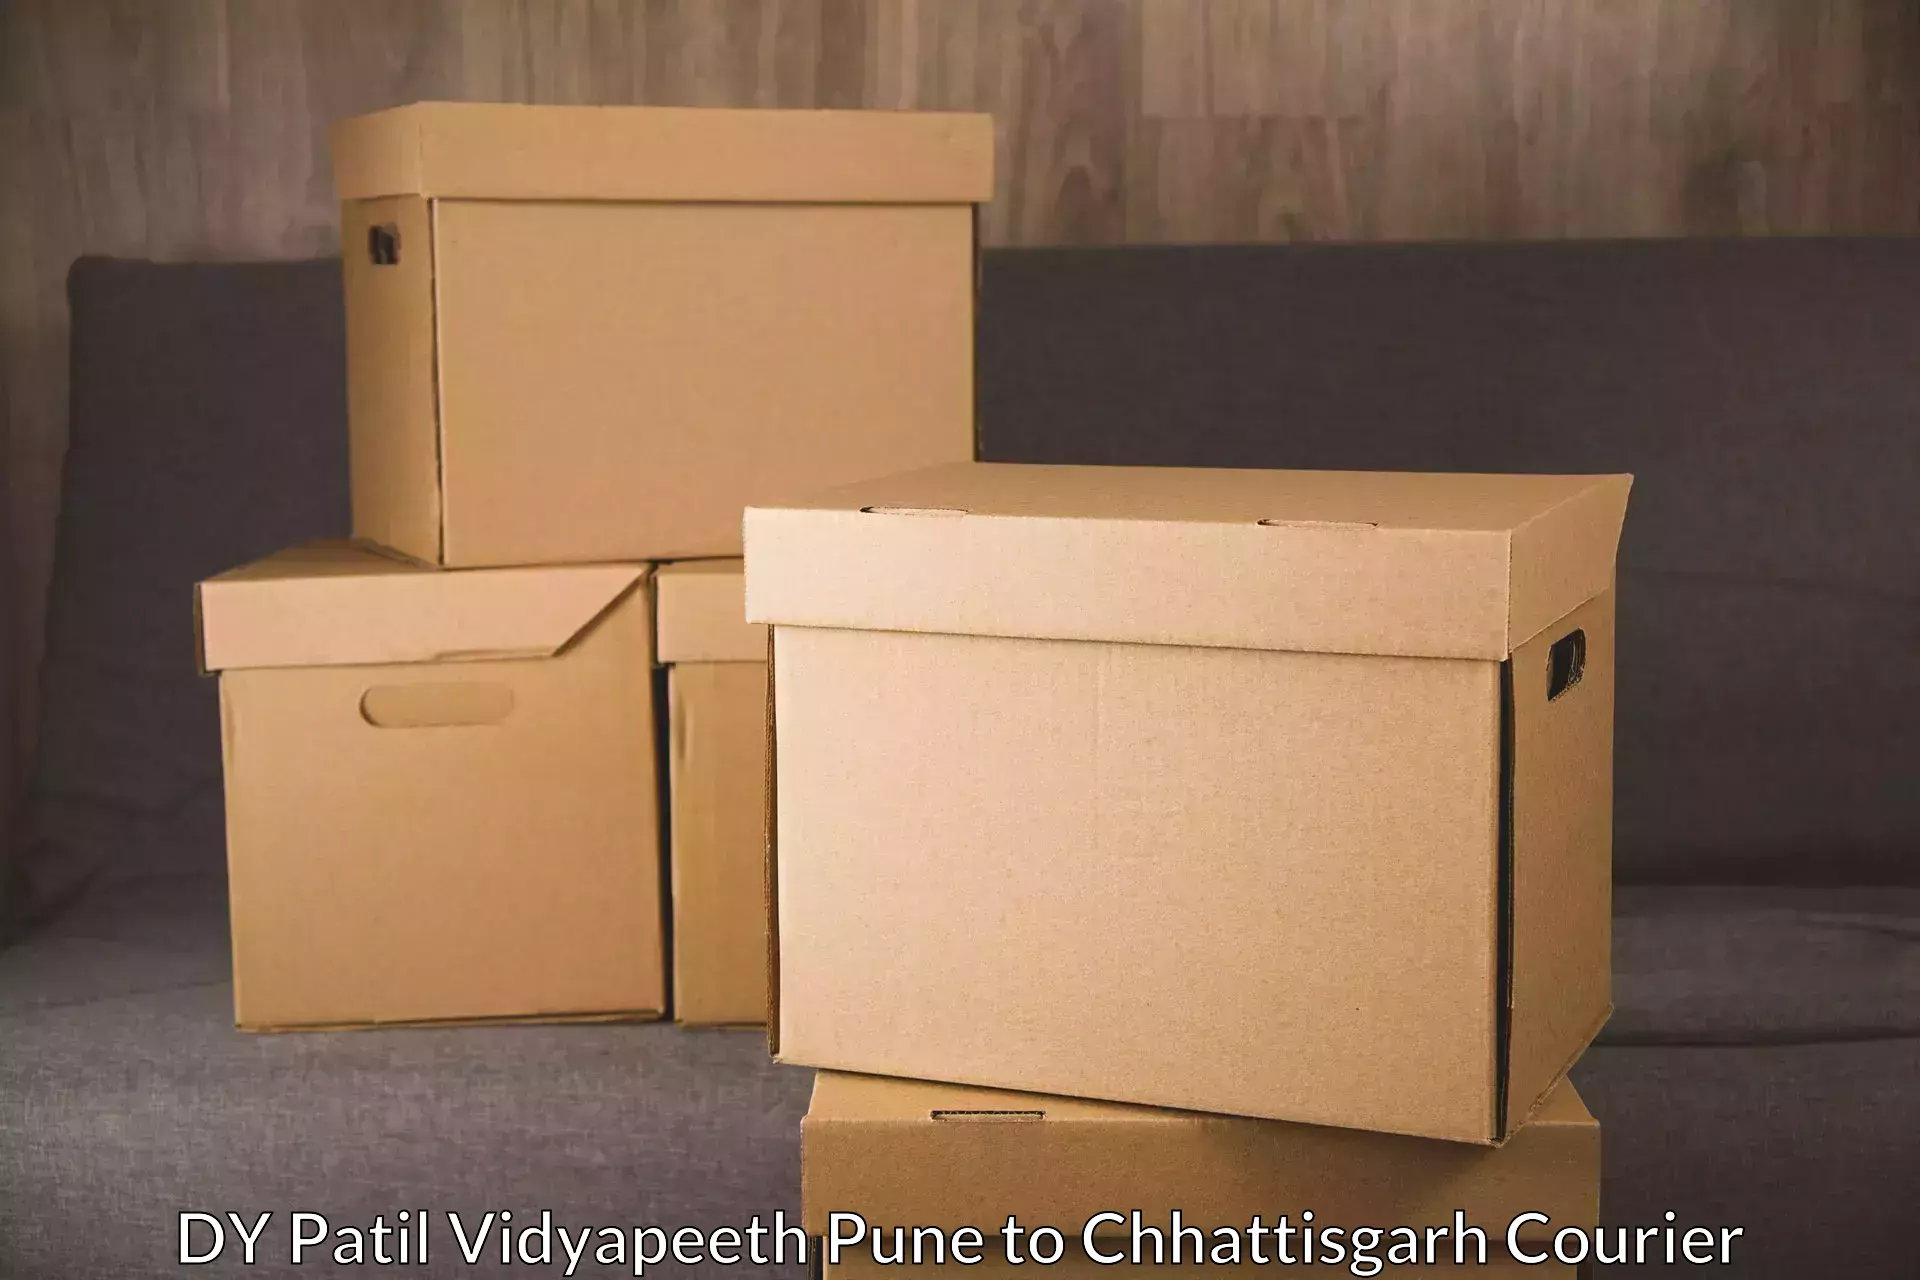 Efficient package consolidation in DY Patil Vidyapeeth Pune to Bhatgaon